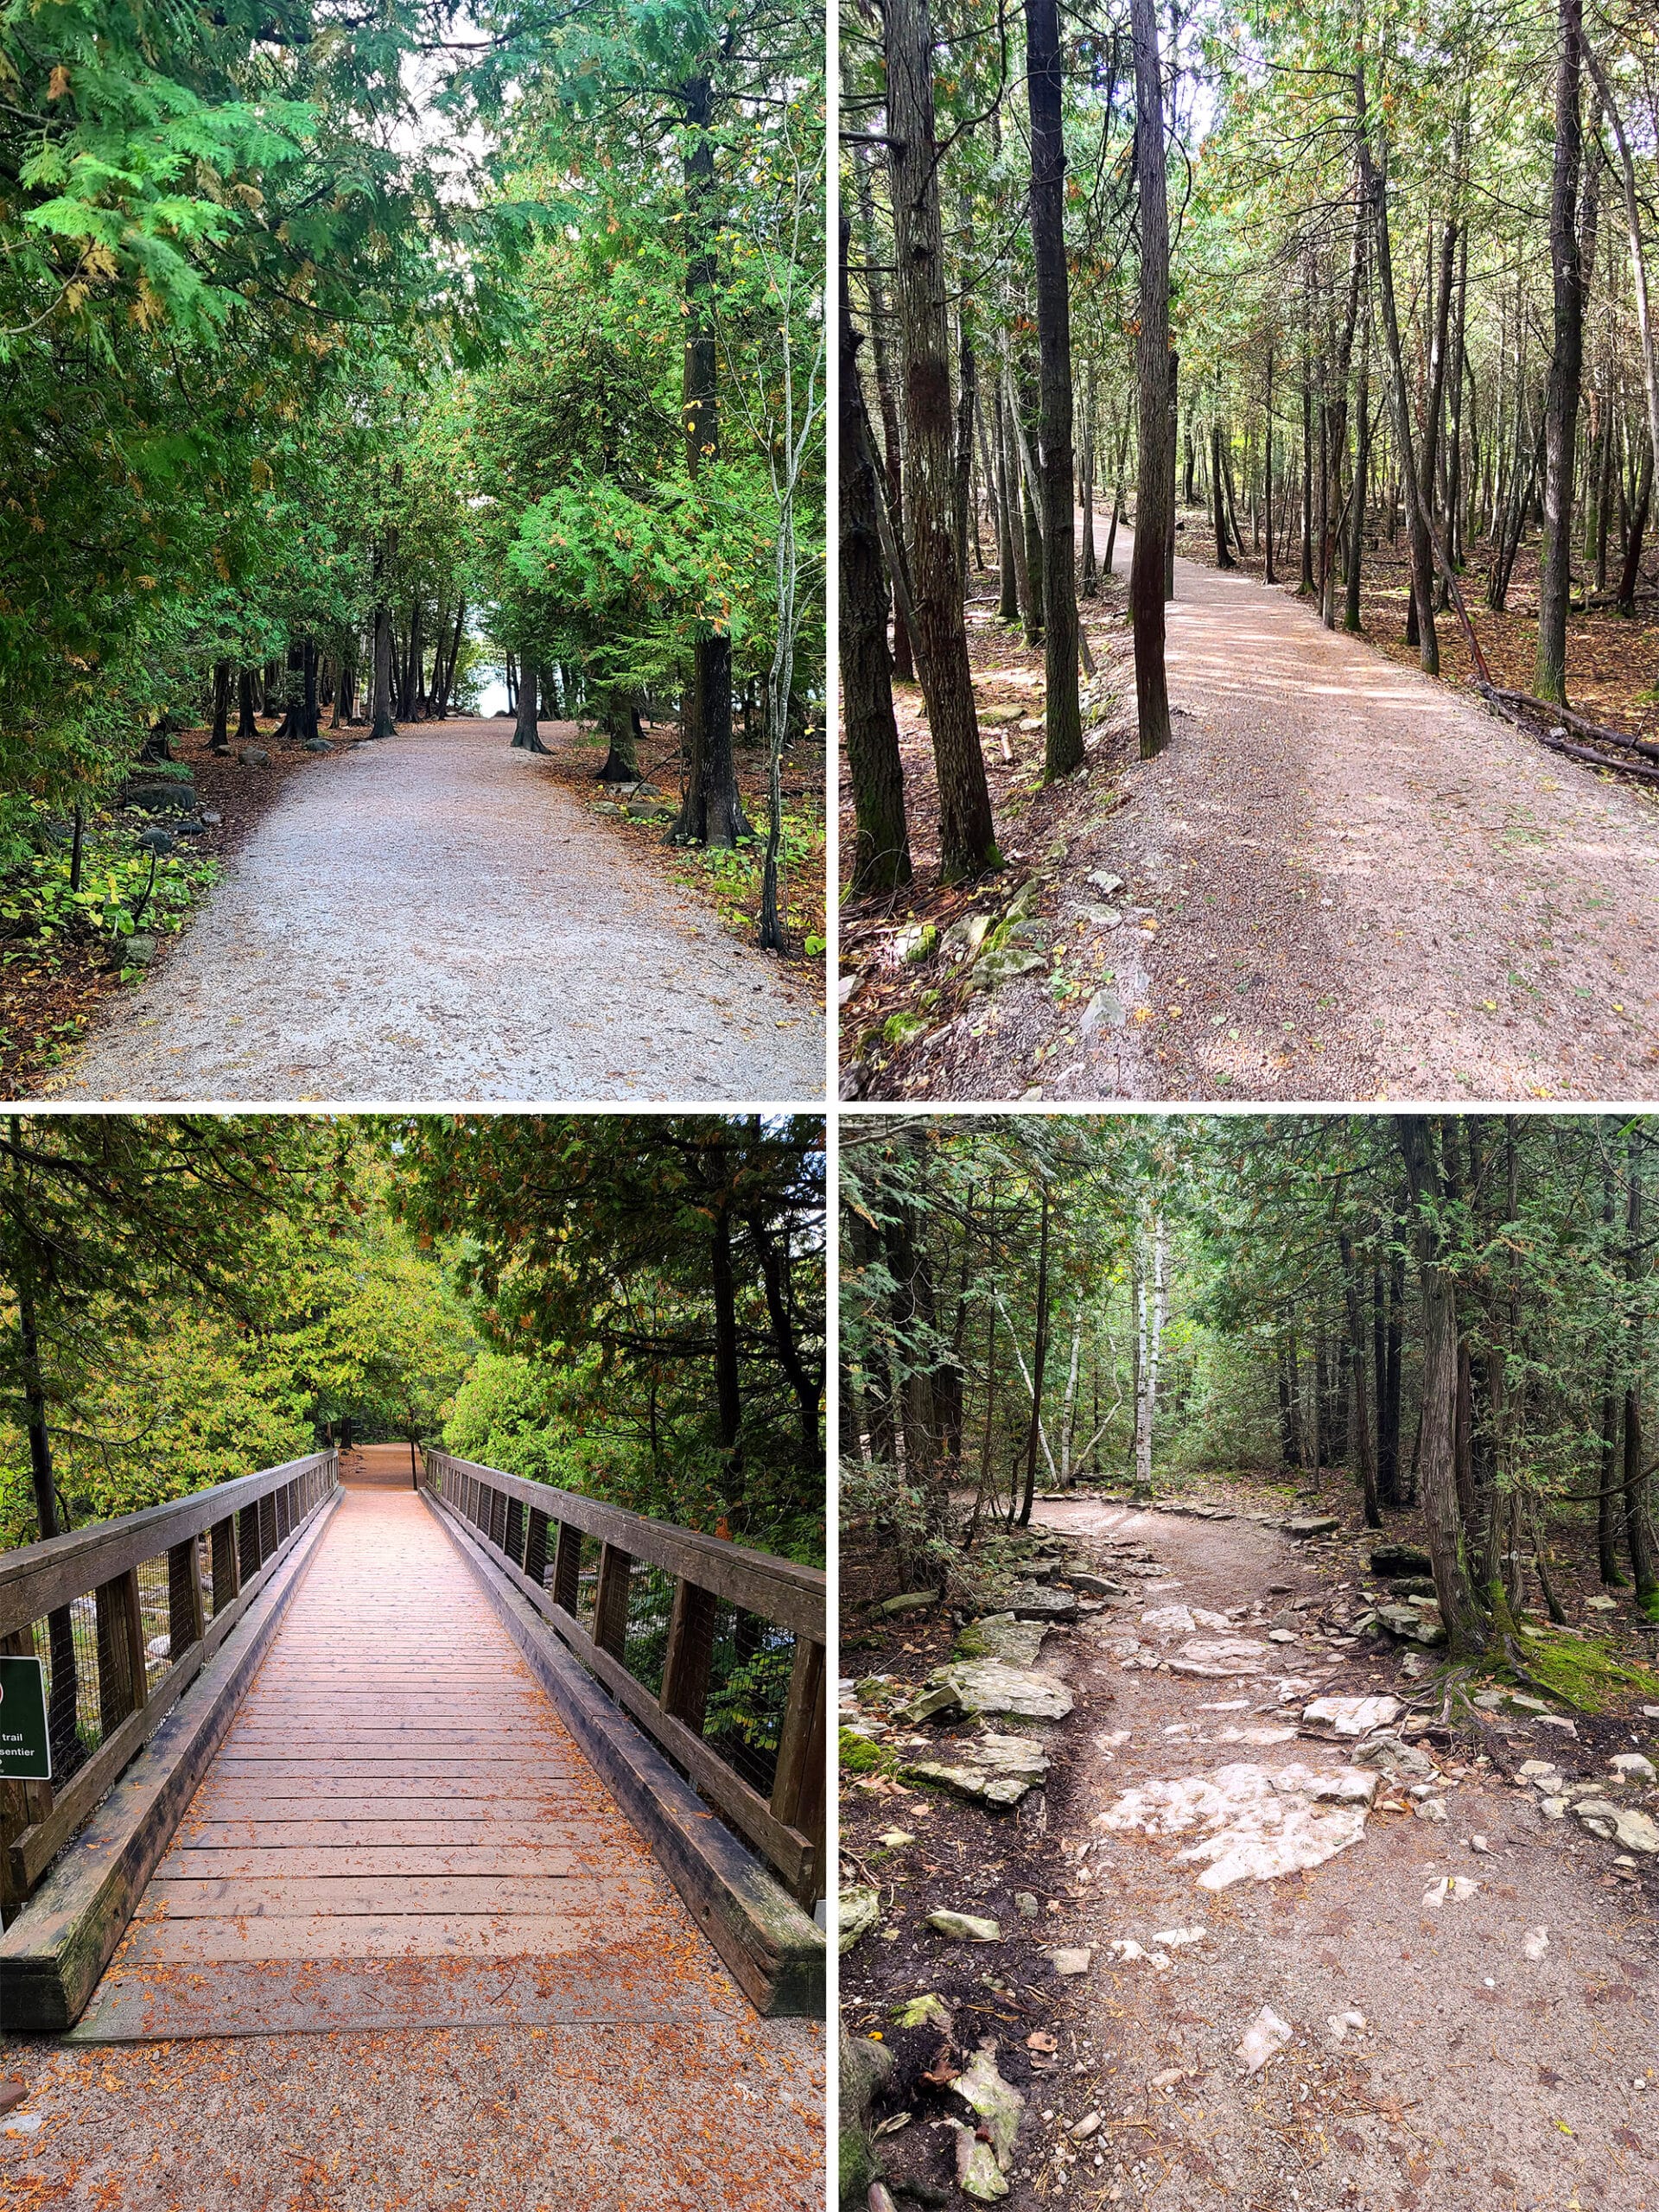 4 part image showing different views along a wide, flat trail.